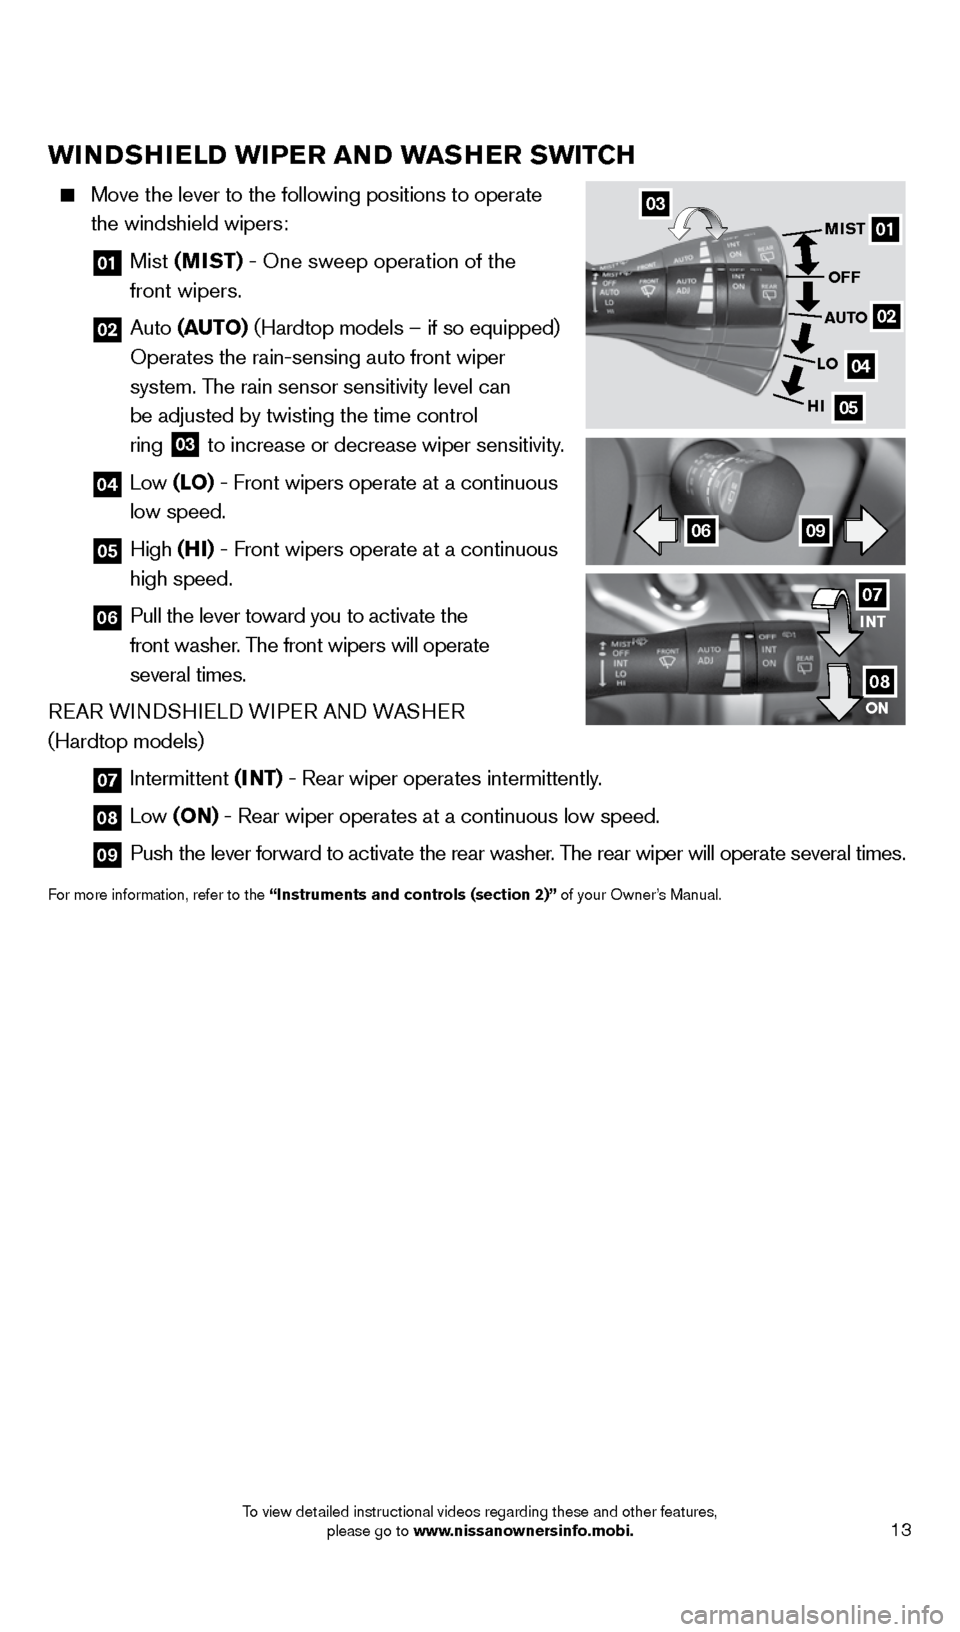 NISSAN MURANO 2014 2.G Quick Reference Guide 13
WINDSHIELD WIPER AND WASHER SWITCH
    Move the lever to the following positions to operate 
the windshield wipers: 
    
01   Mist  (MIST) - One sweep operation of the  
front wipers.
  
02   Auto